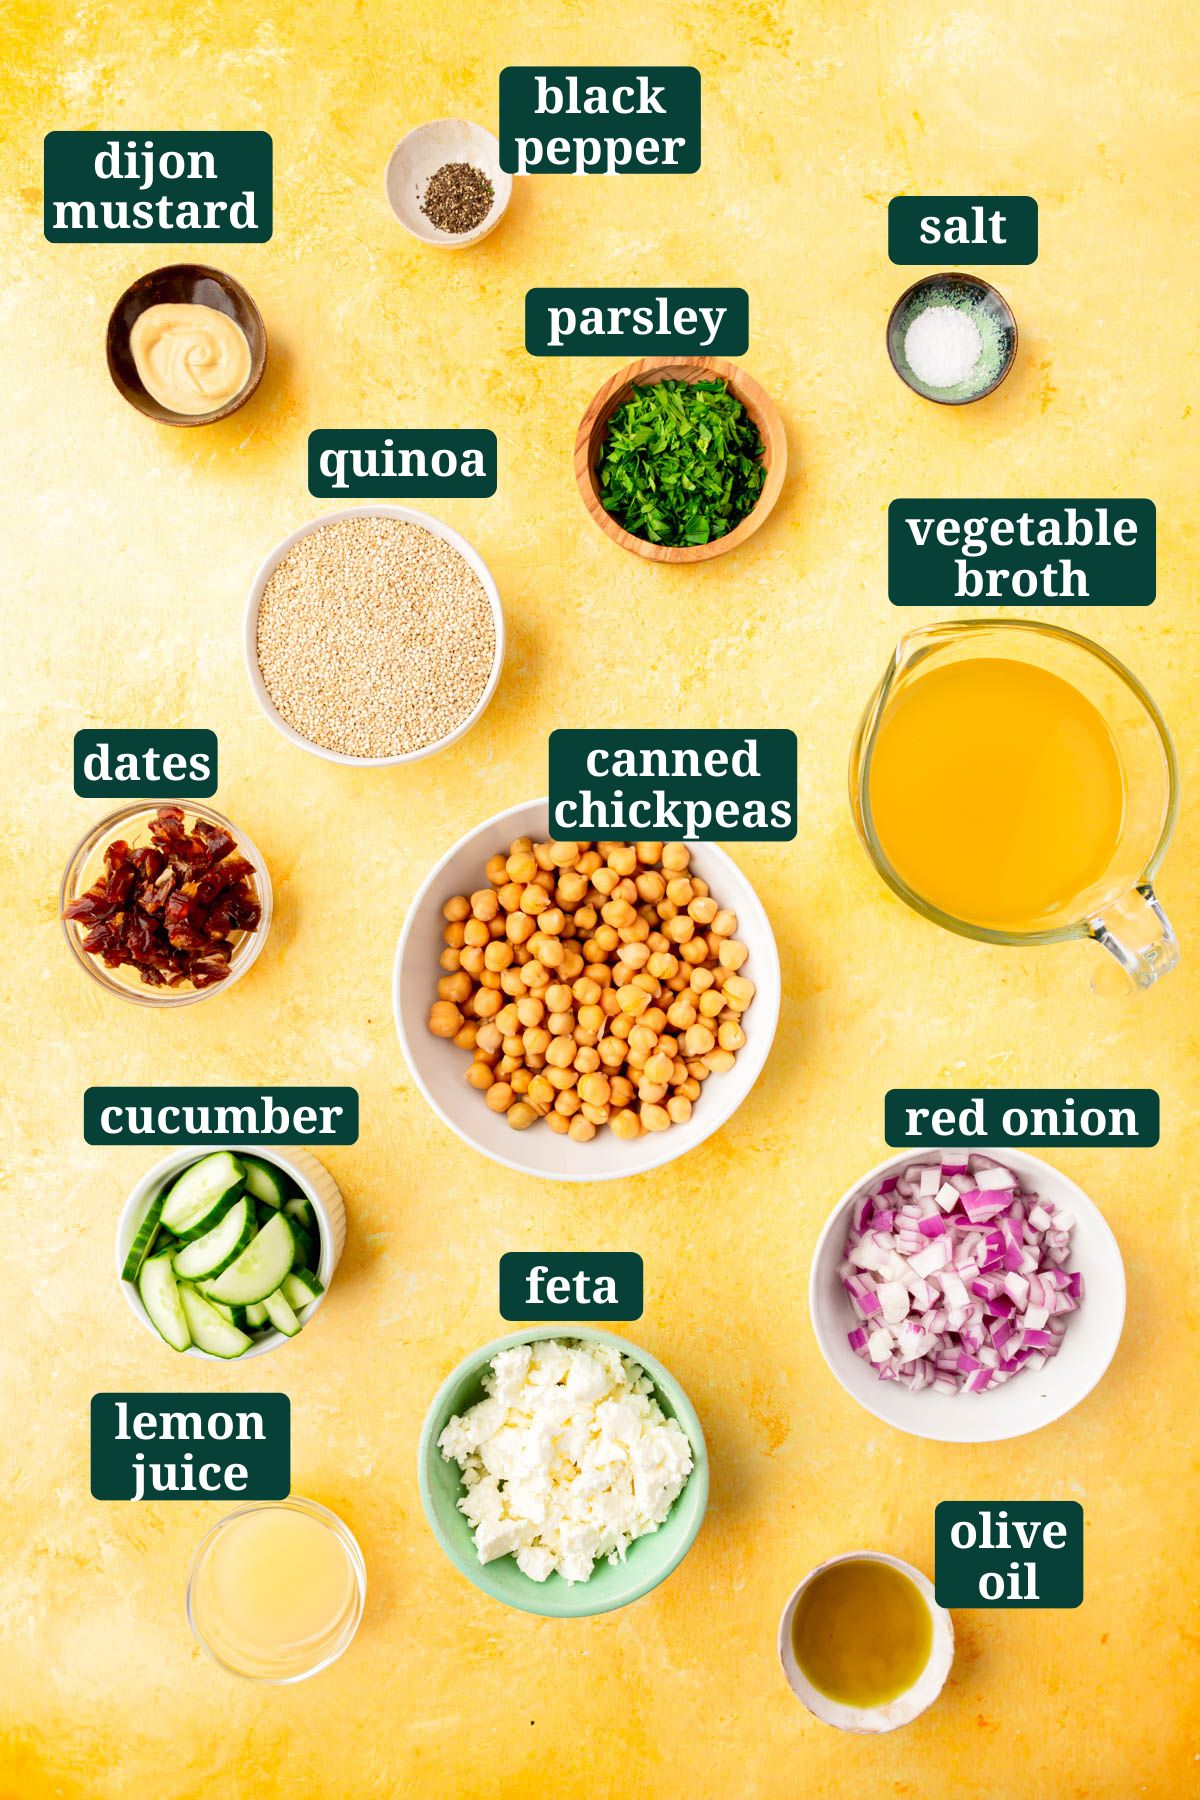 Ingredients in small bowls on a yellow table to make a cold quinoa chickpea salad, including fresh chopped parsley, dijon mustard, red onions, feta, cucumber, dates, salt, vegetable broth, and oil with text overlays over each ingredient.